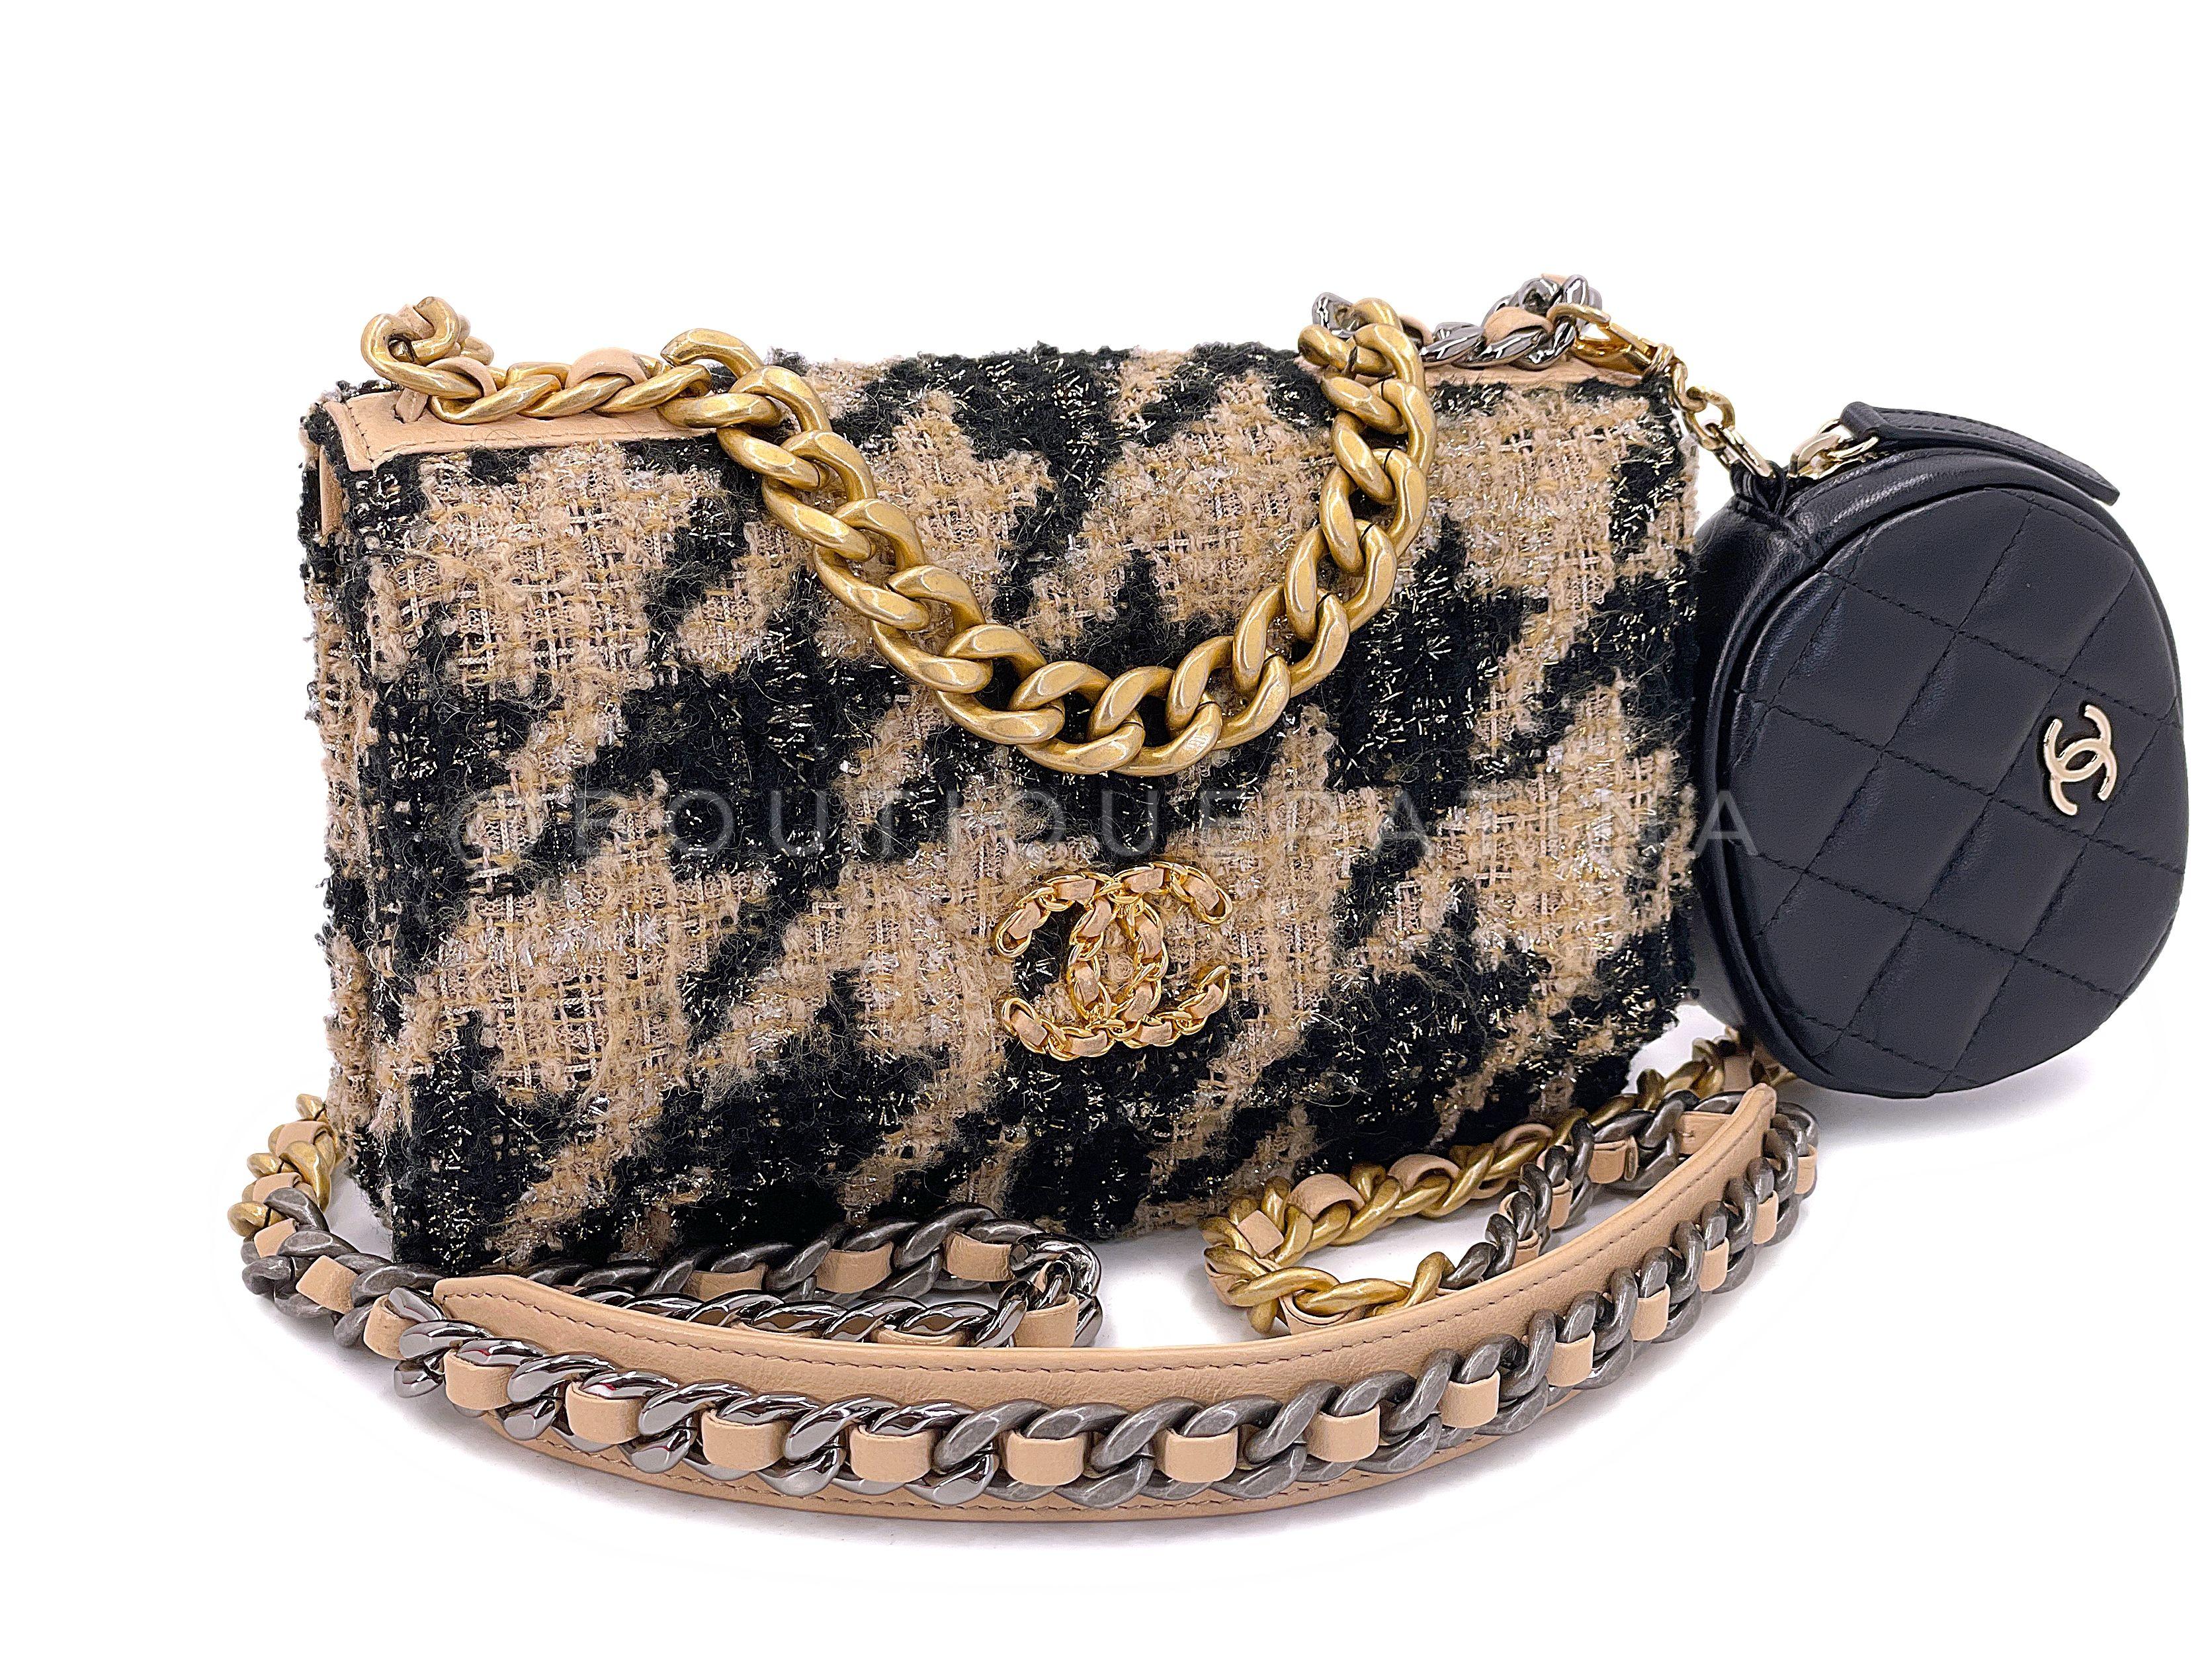 Store item: 67757
The WOC is a must-have Chanel due to its chic style and extreme versatility. The long 24-inch woven silver chain can be worn single across the body, double on the shoulder, triple as a hand purse or inside the bag, as a